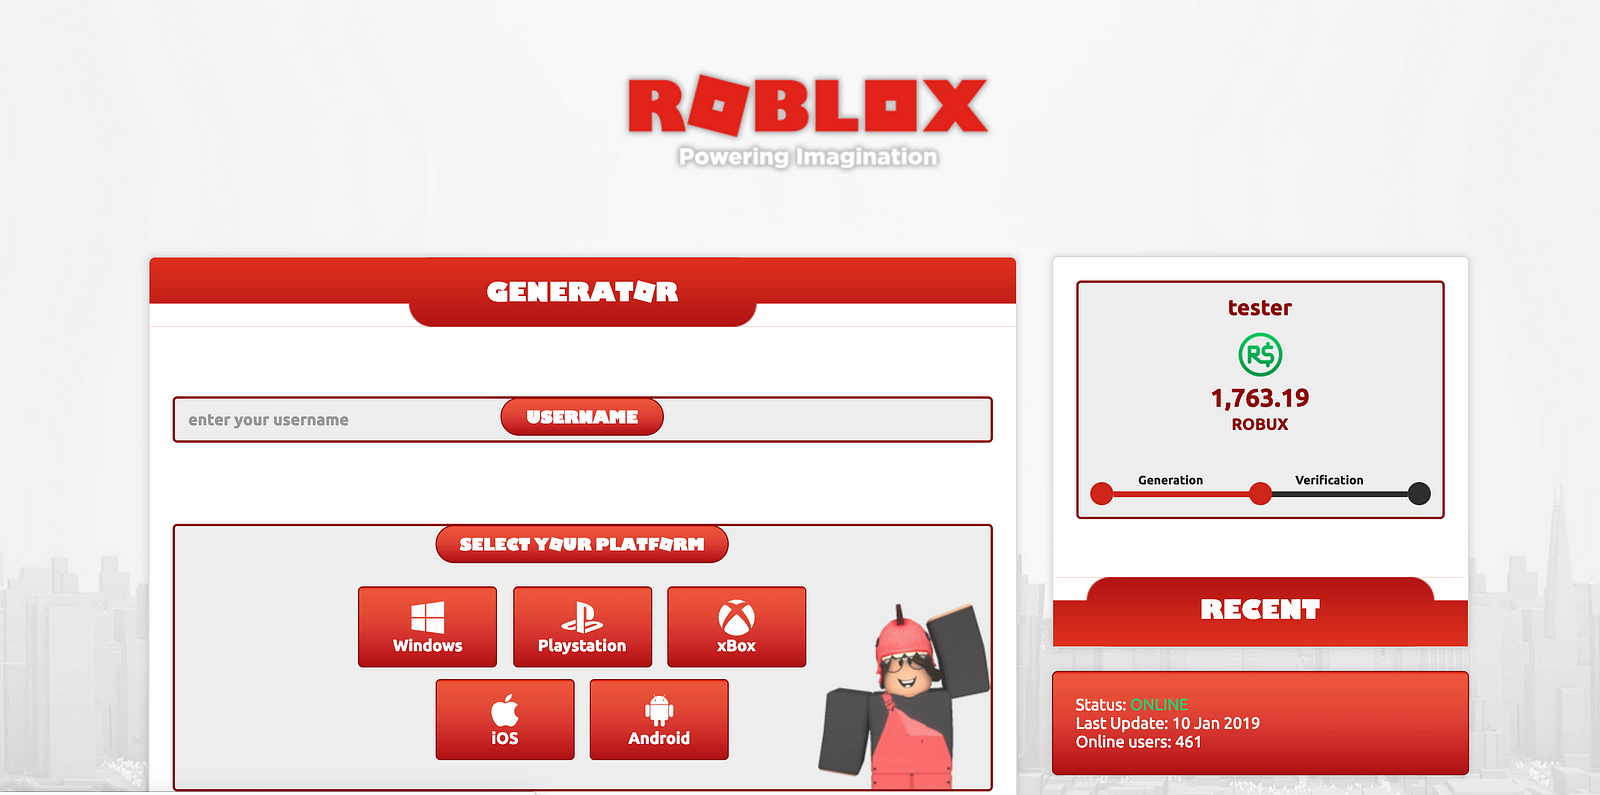 Ad for unlimited robux